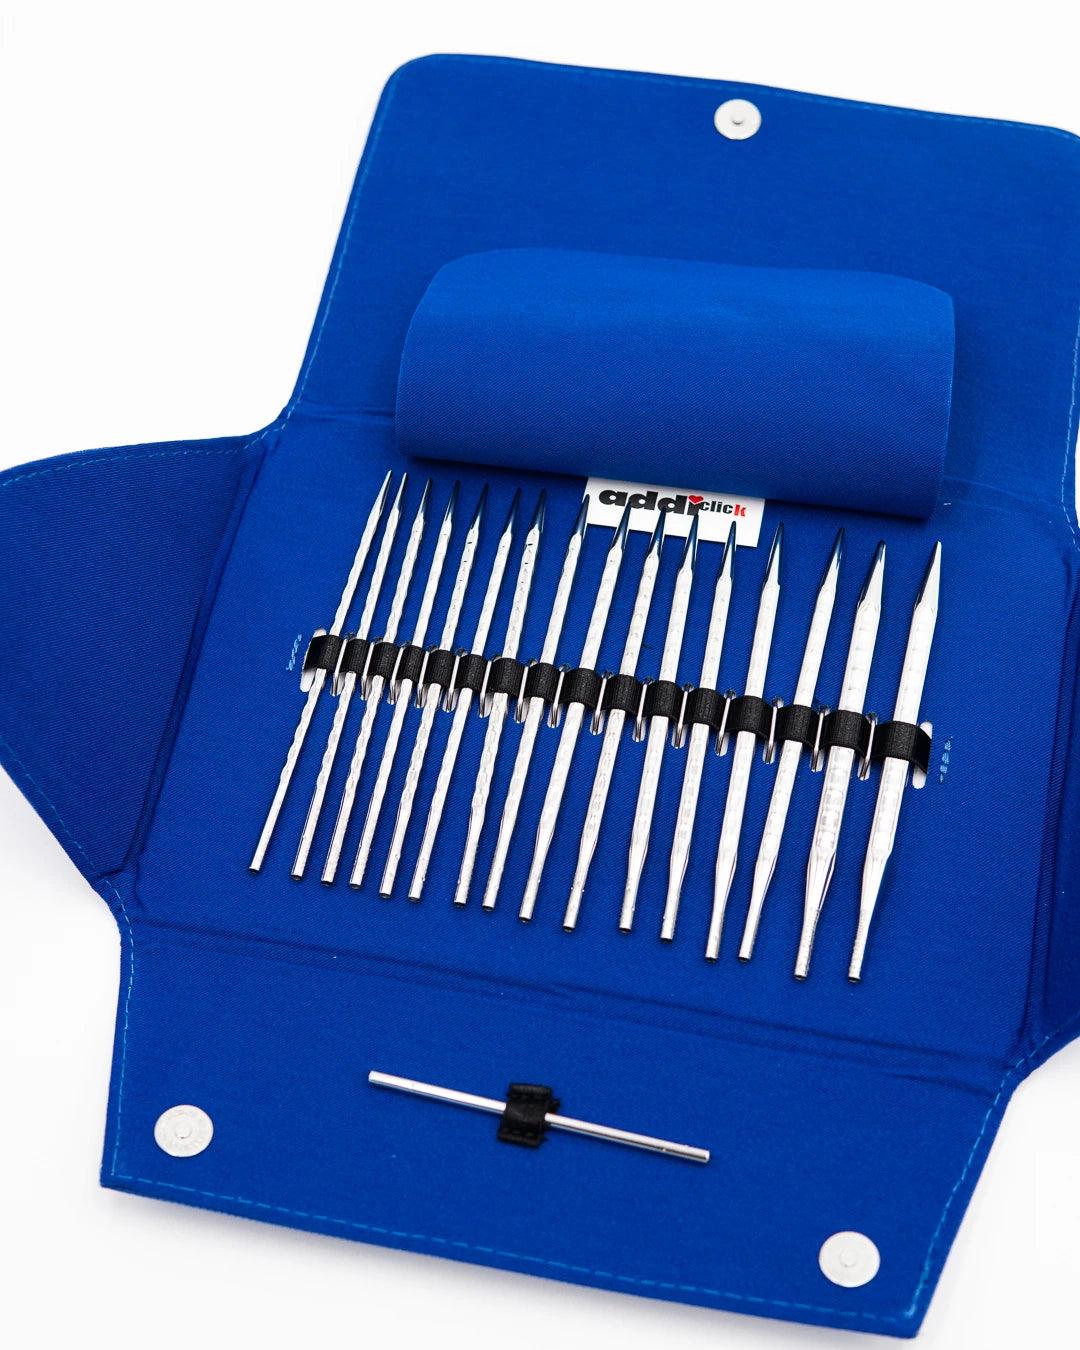 addiClick Interchangeable Needle Set (Standard Rocket 2 [Squared]) - Aimee Sher Makes